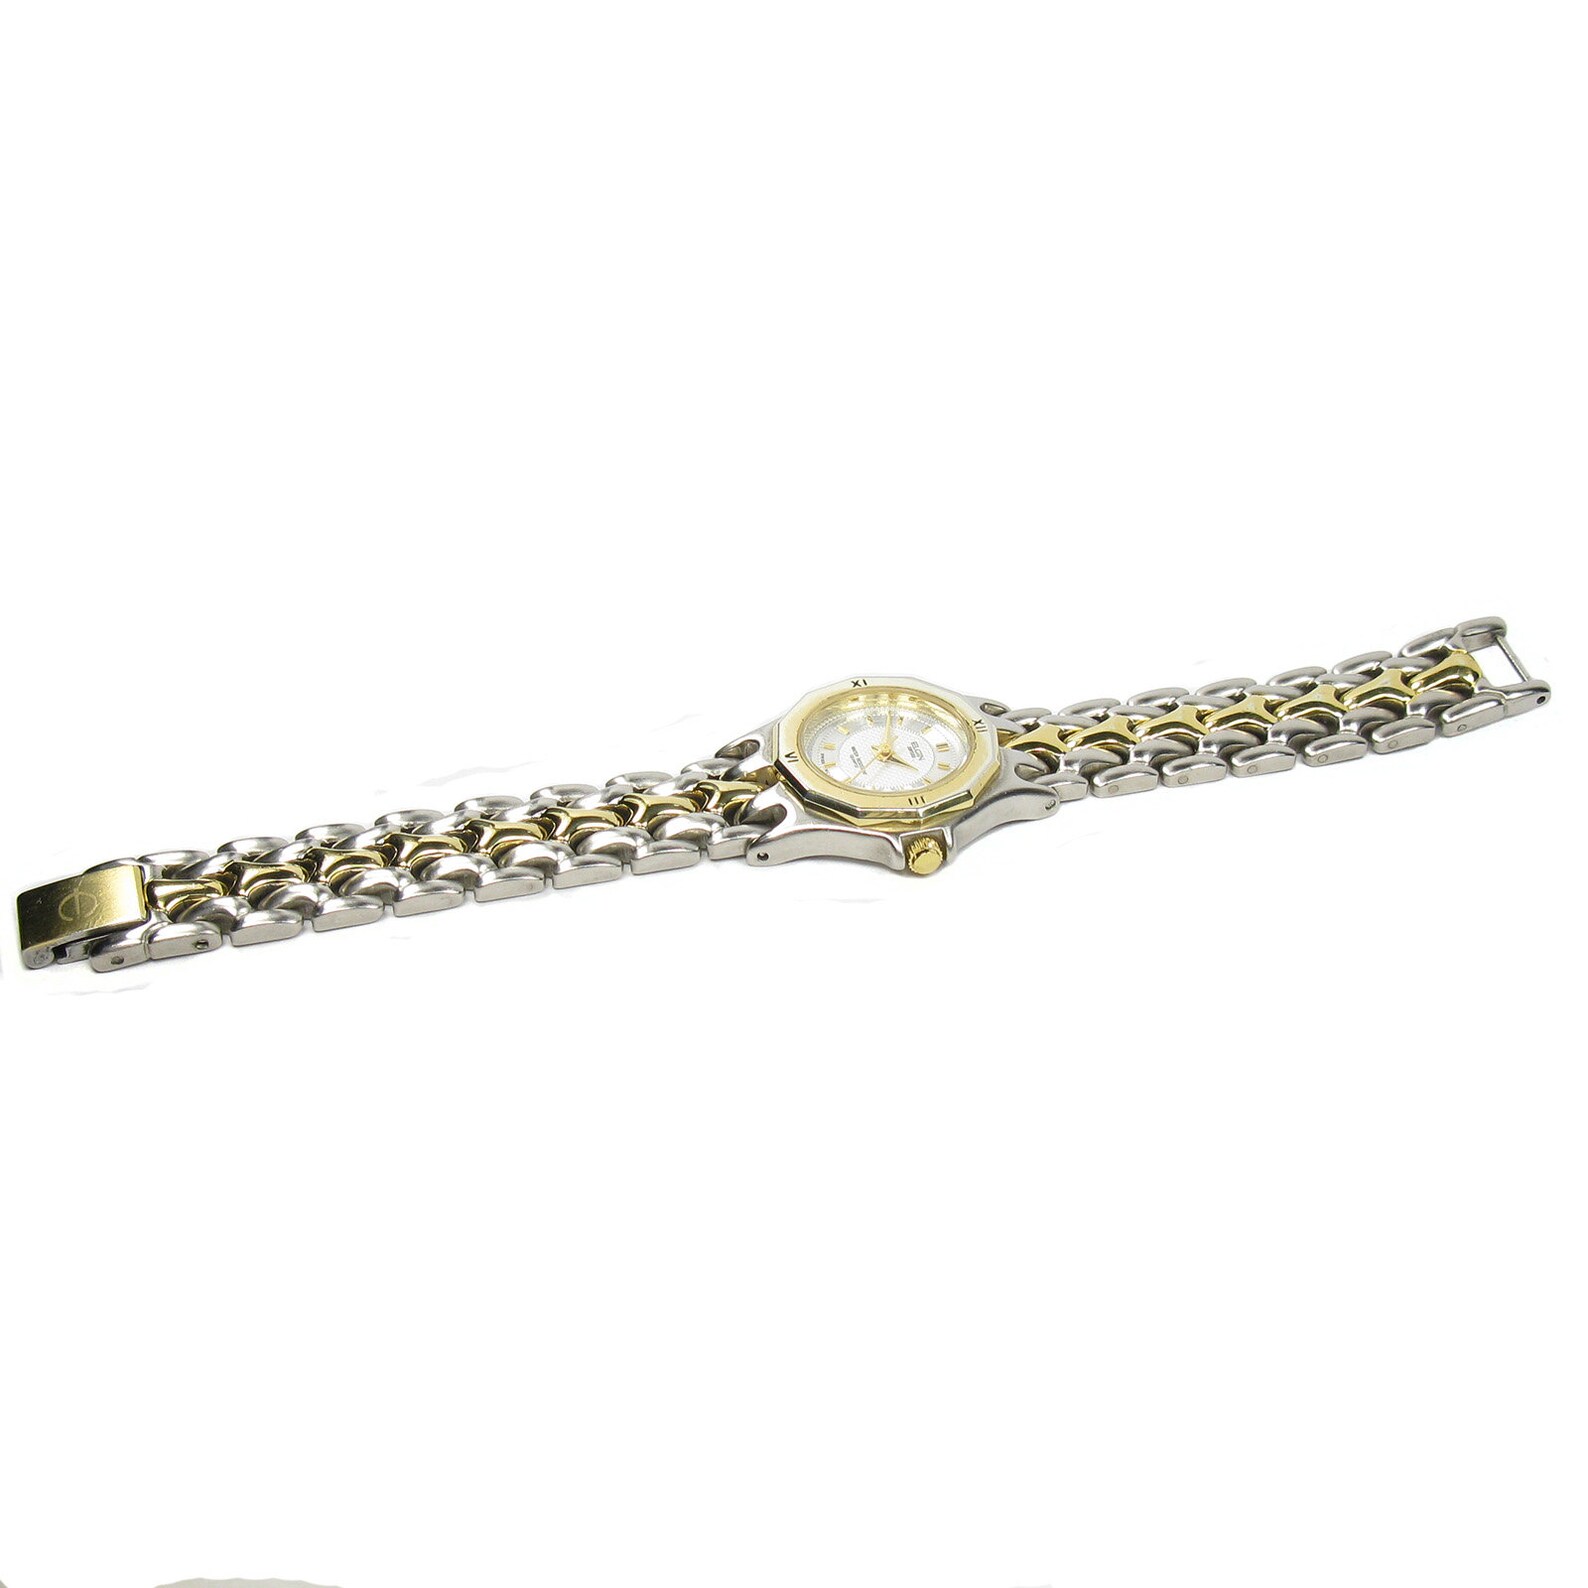 ELGIN Women's Watch Model ELS241-040 Silver and Gold Tone - Etsy